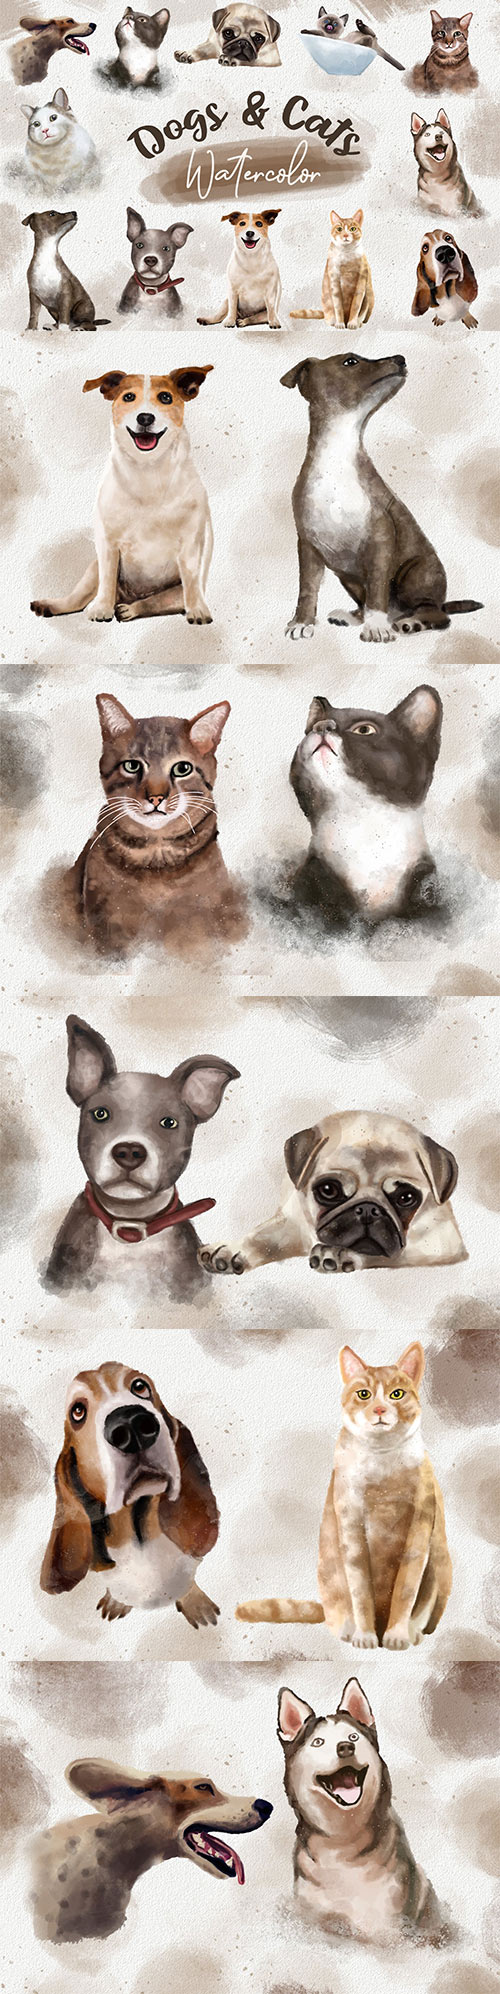 Dogs and Cats Watercolor Collection Clipart Bundle PNG 1125968